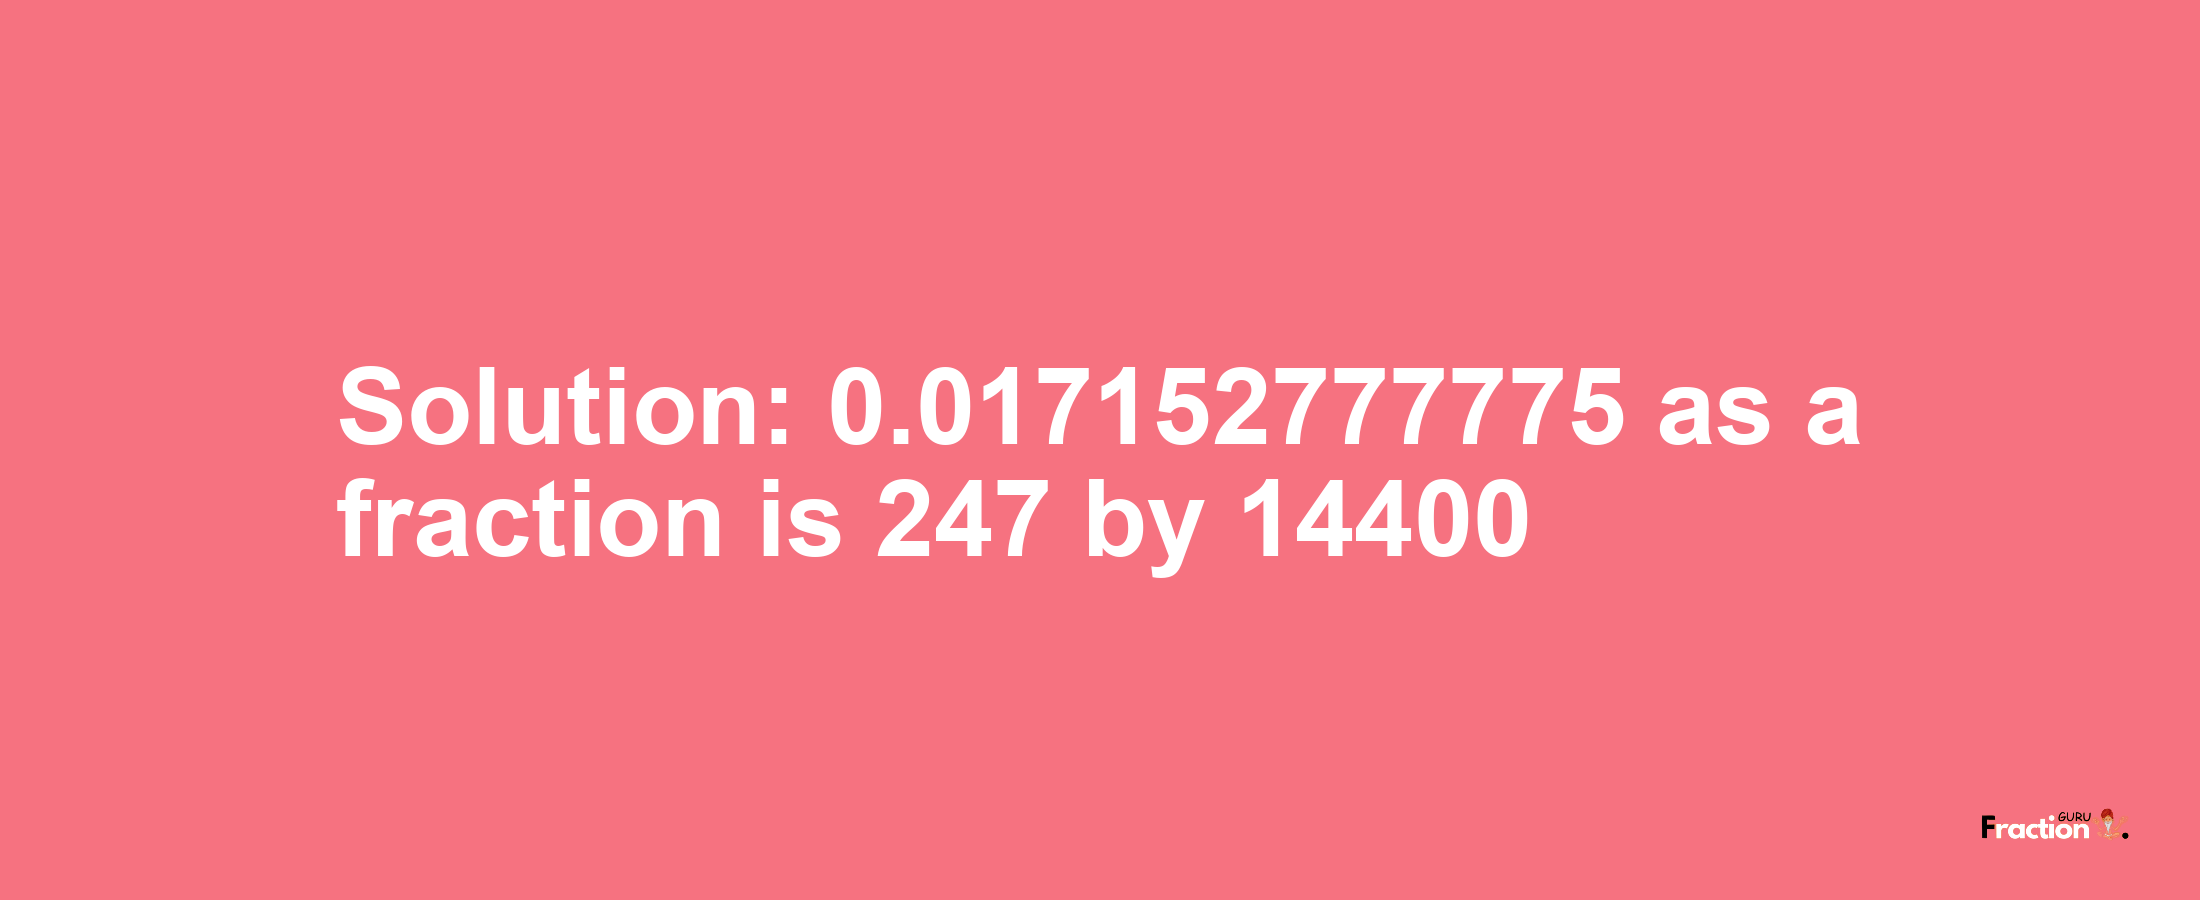 Solution:0.017152777775 as a fraction is 247/14400